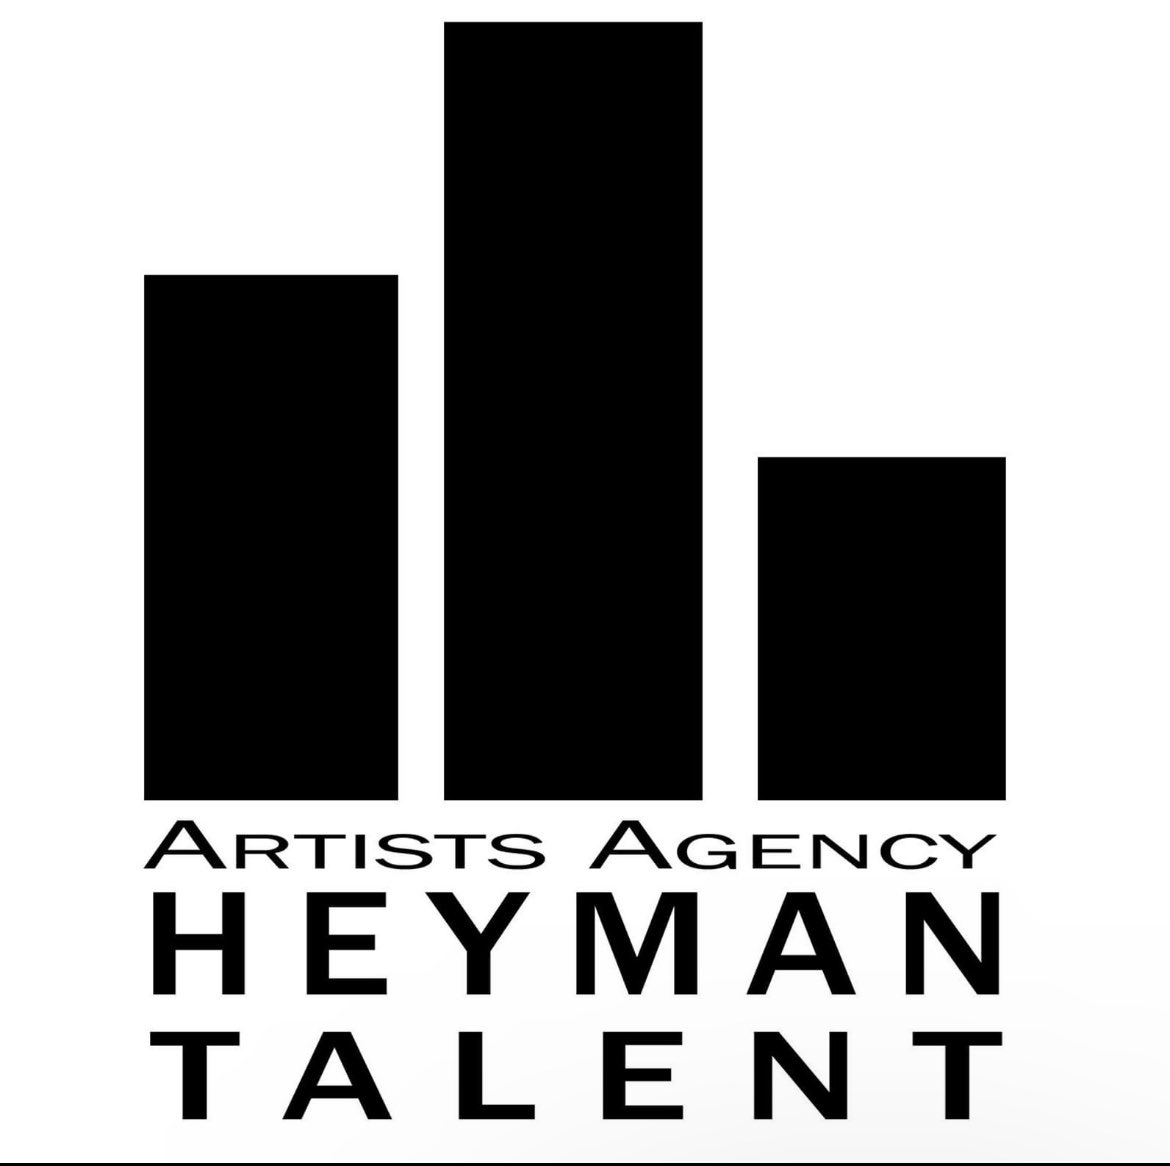 A NEW JOURNEY HAS BEGUN!⭐️⭐️⭐️ I am BEYOND happy to announce that I have achieved representation from HeyMan Talent Agency! 🥳🥳🎉🎉 Beyond excited to be working with them! @HeymanTalent Always keep going and never give up on your dreams, you WILL get there! 🥹🥹#voiceacting